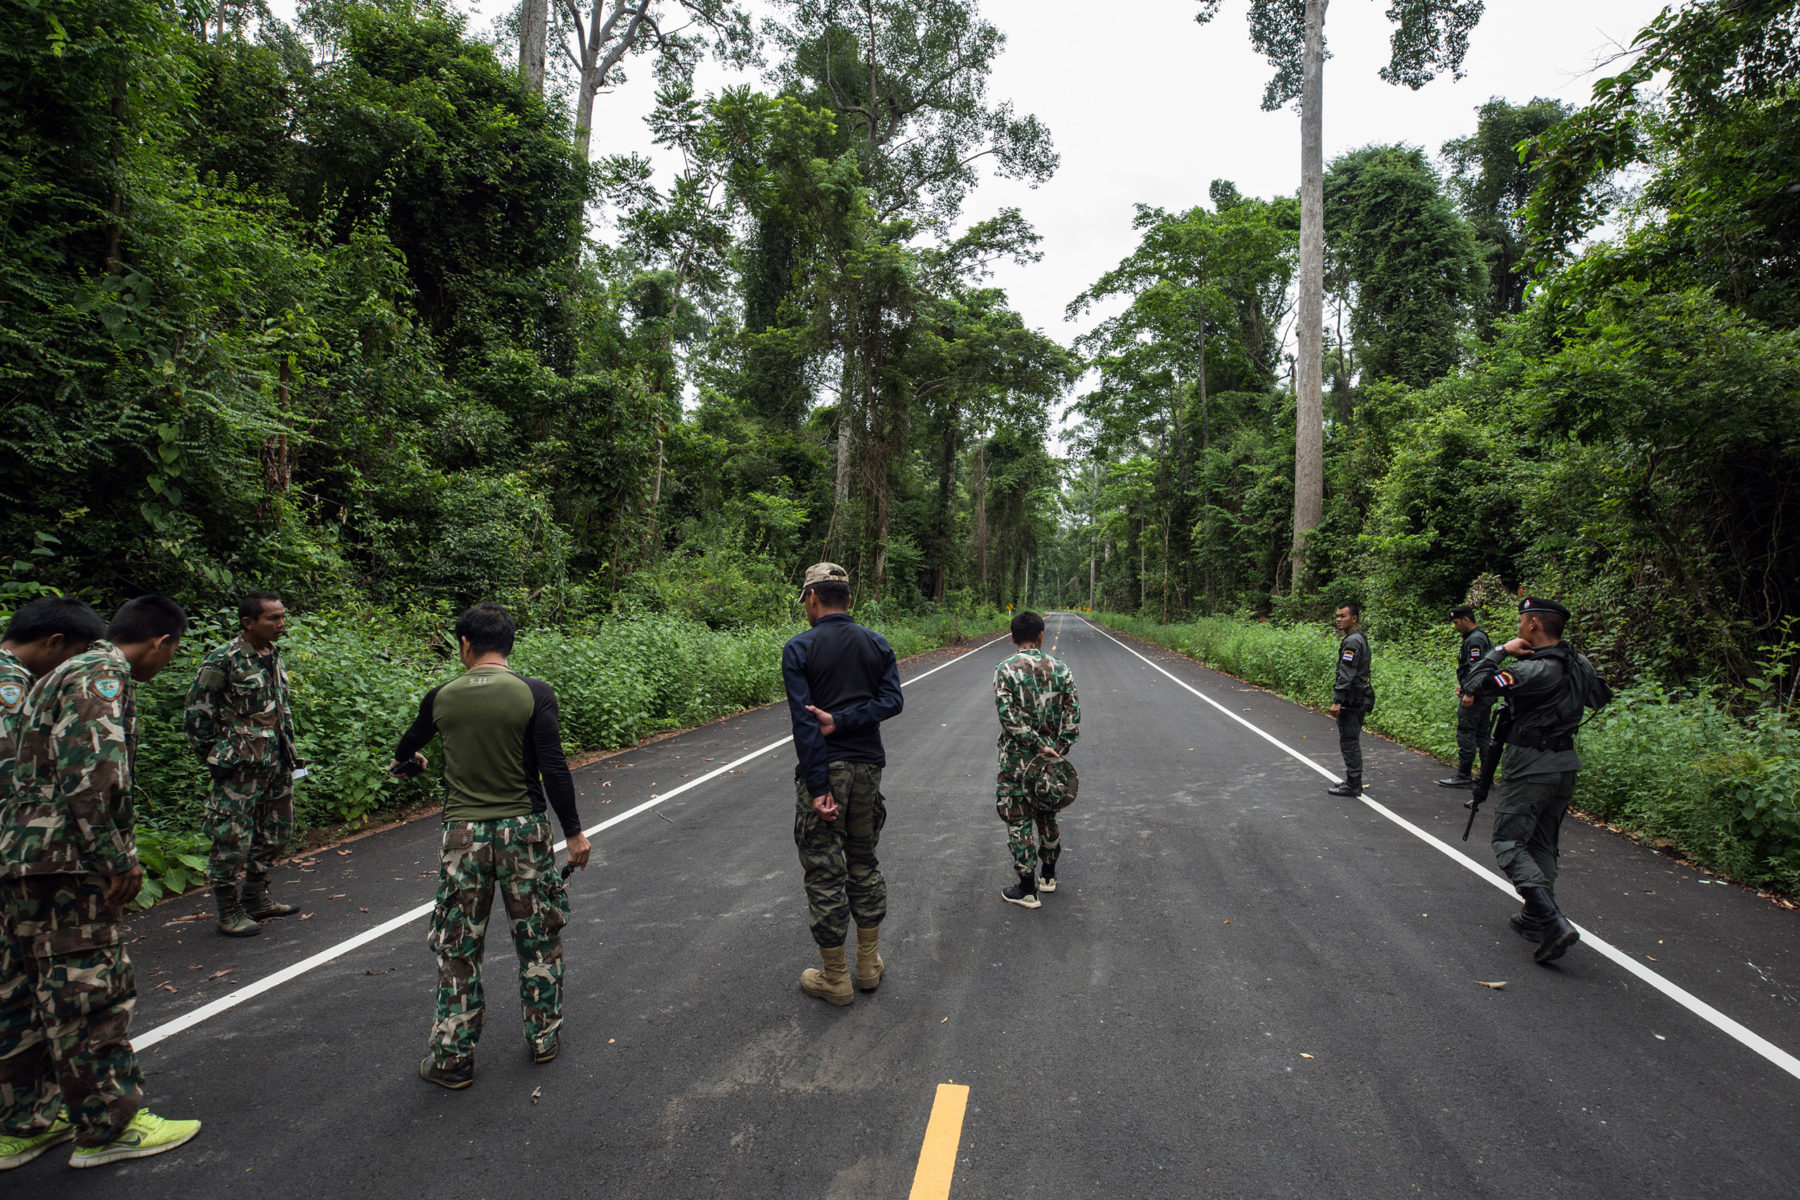 Forest rangers in the Ta Phraya National Park inspect a road close to the Cambodian border with recent tracks made by illegal loggers (Image: Luke Duggleby)